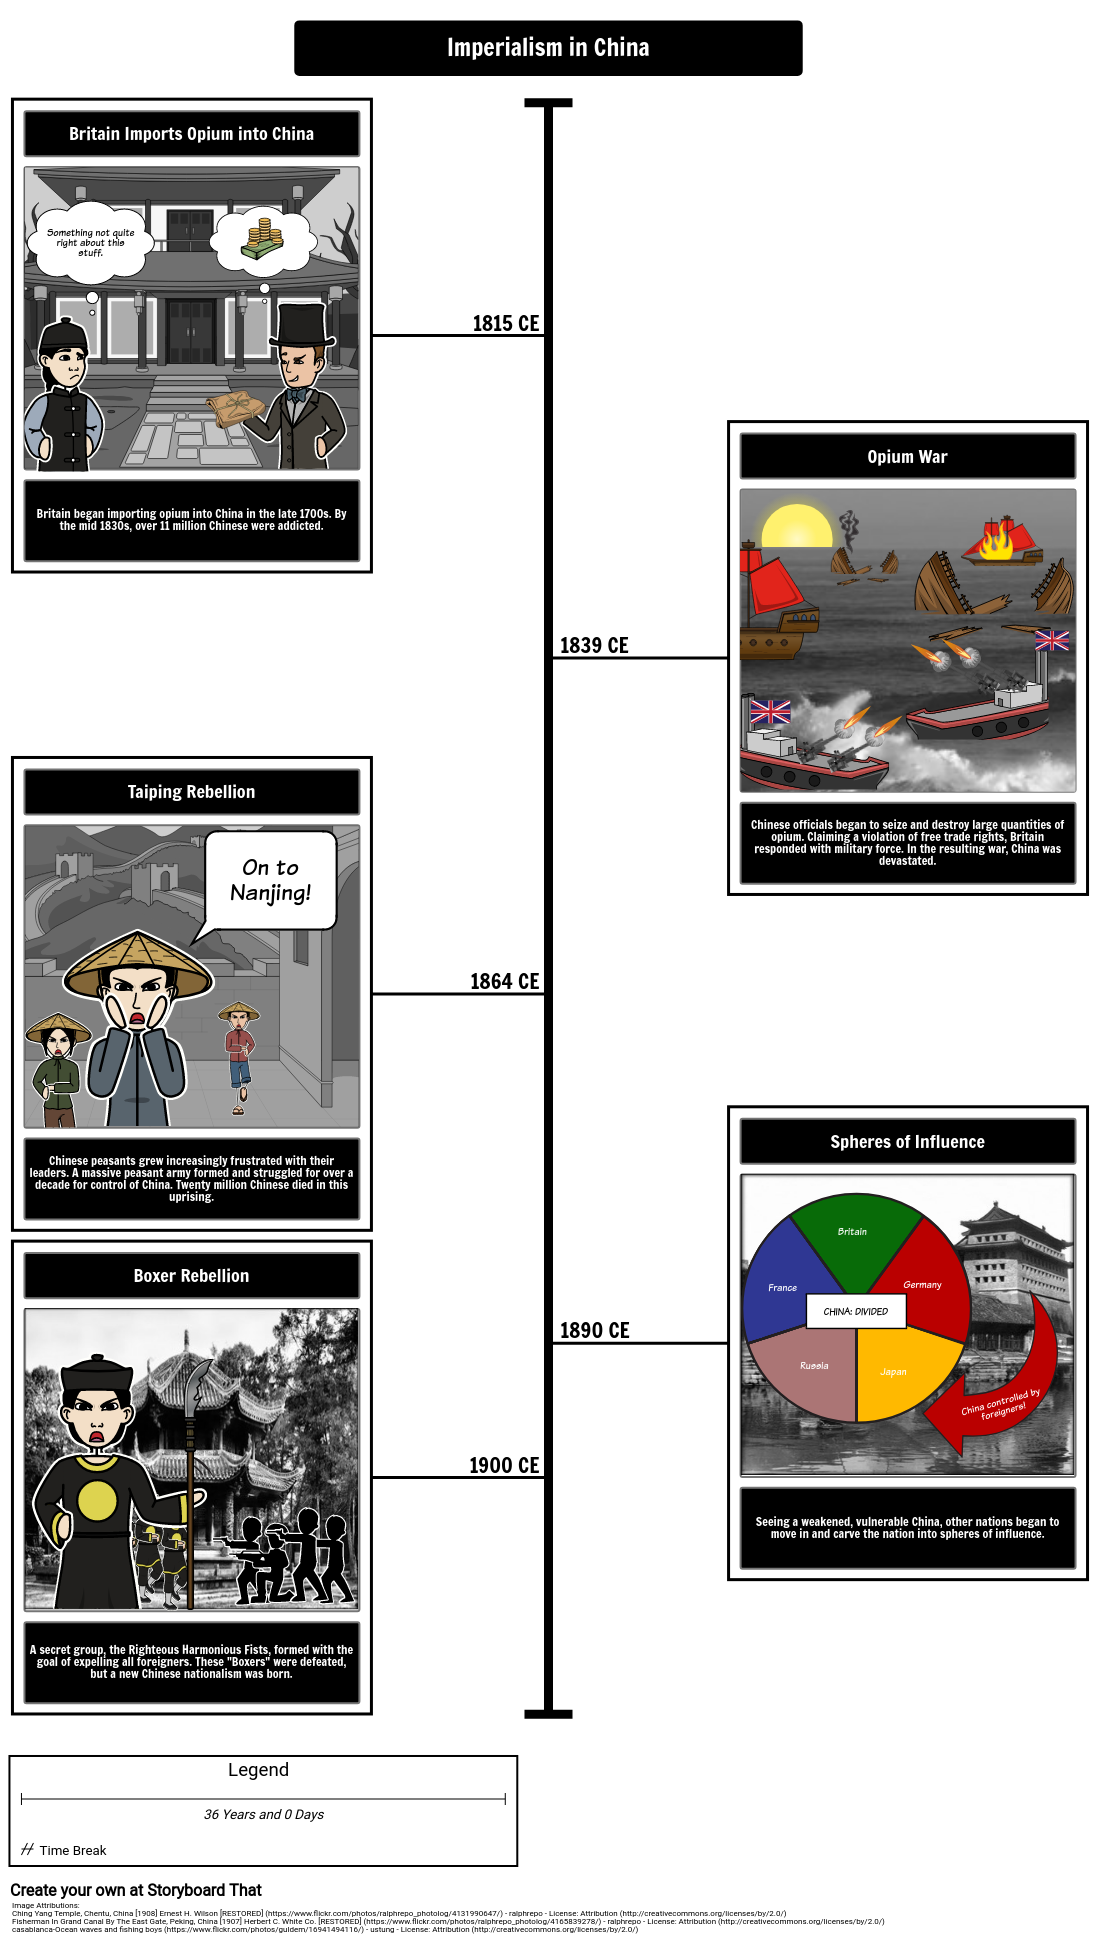 Imperialism in China Timeline Storyboard